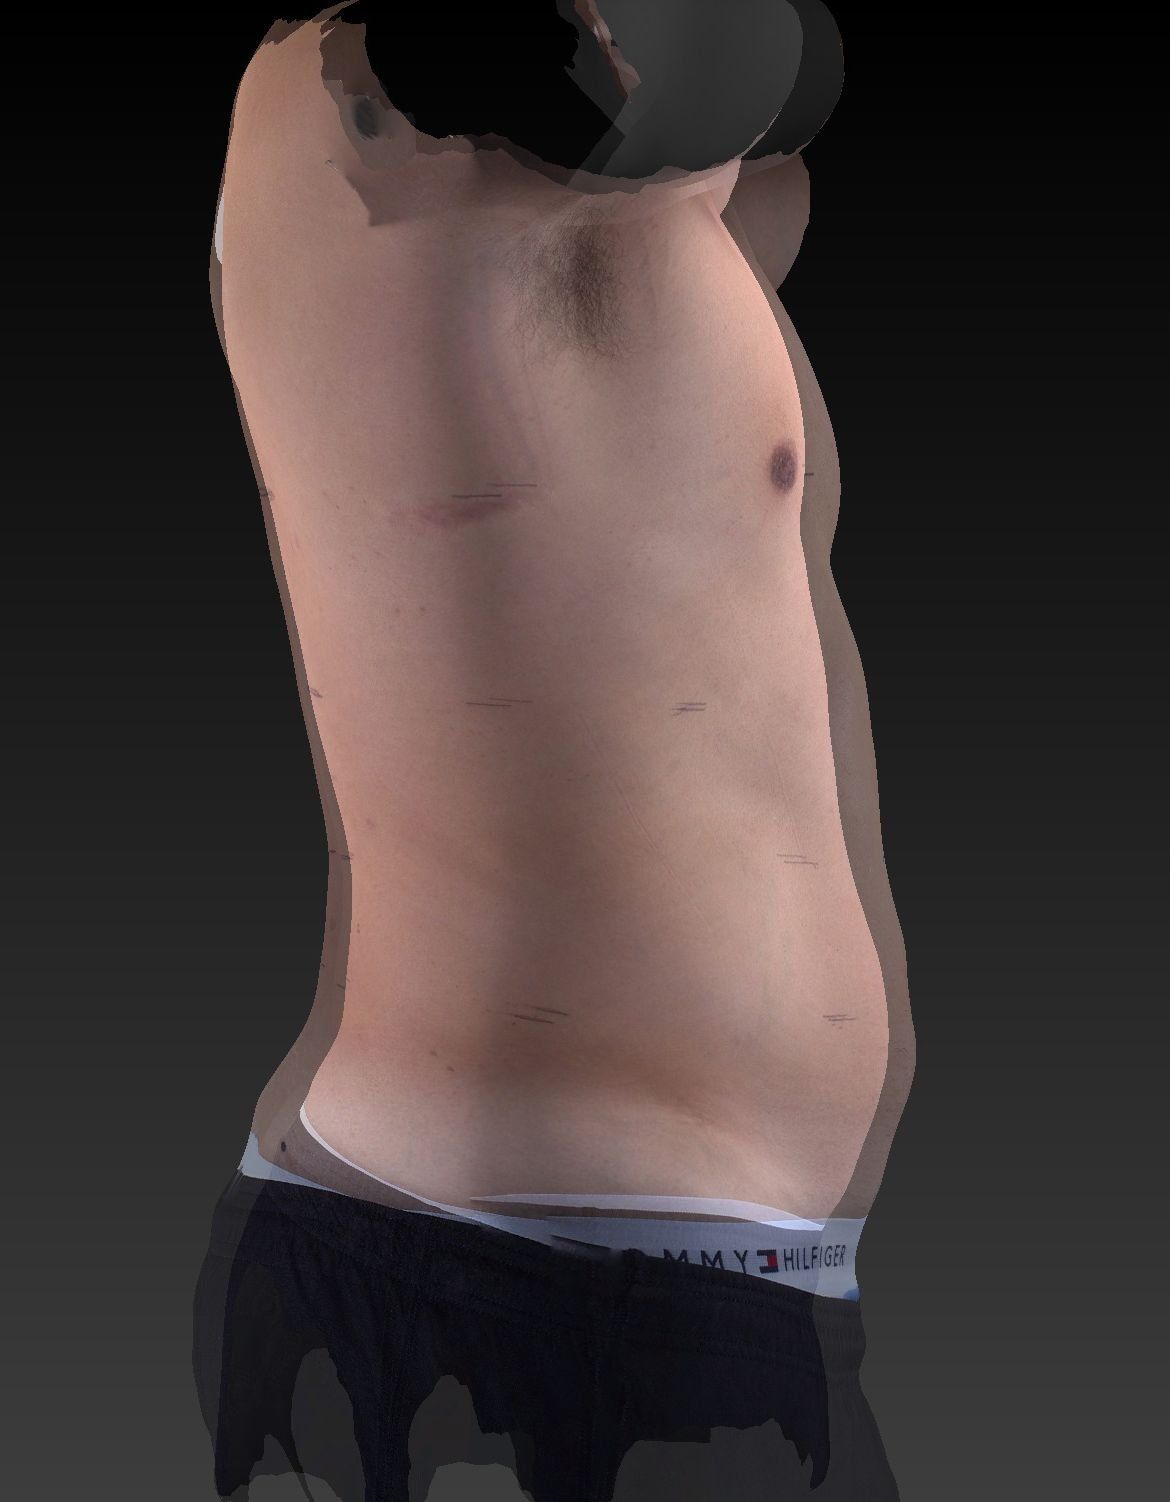 Before and after photo of a man who received an UltraSlim treatment